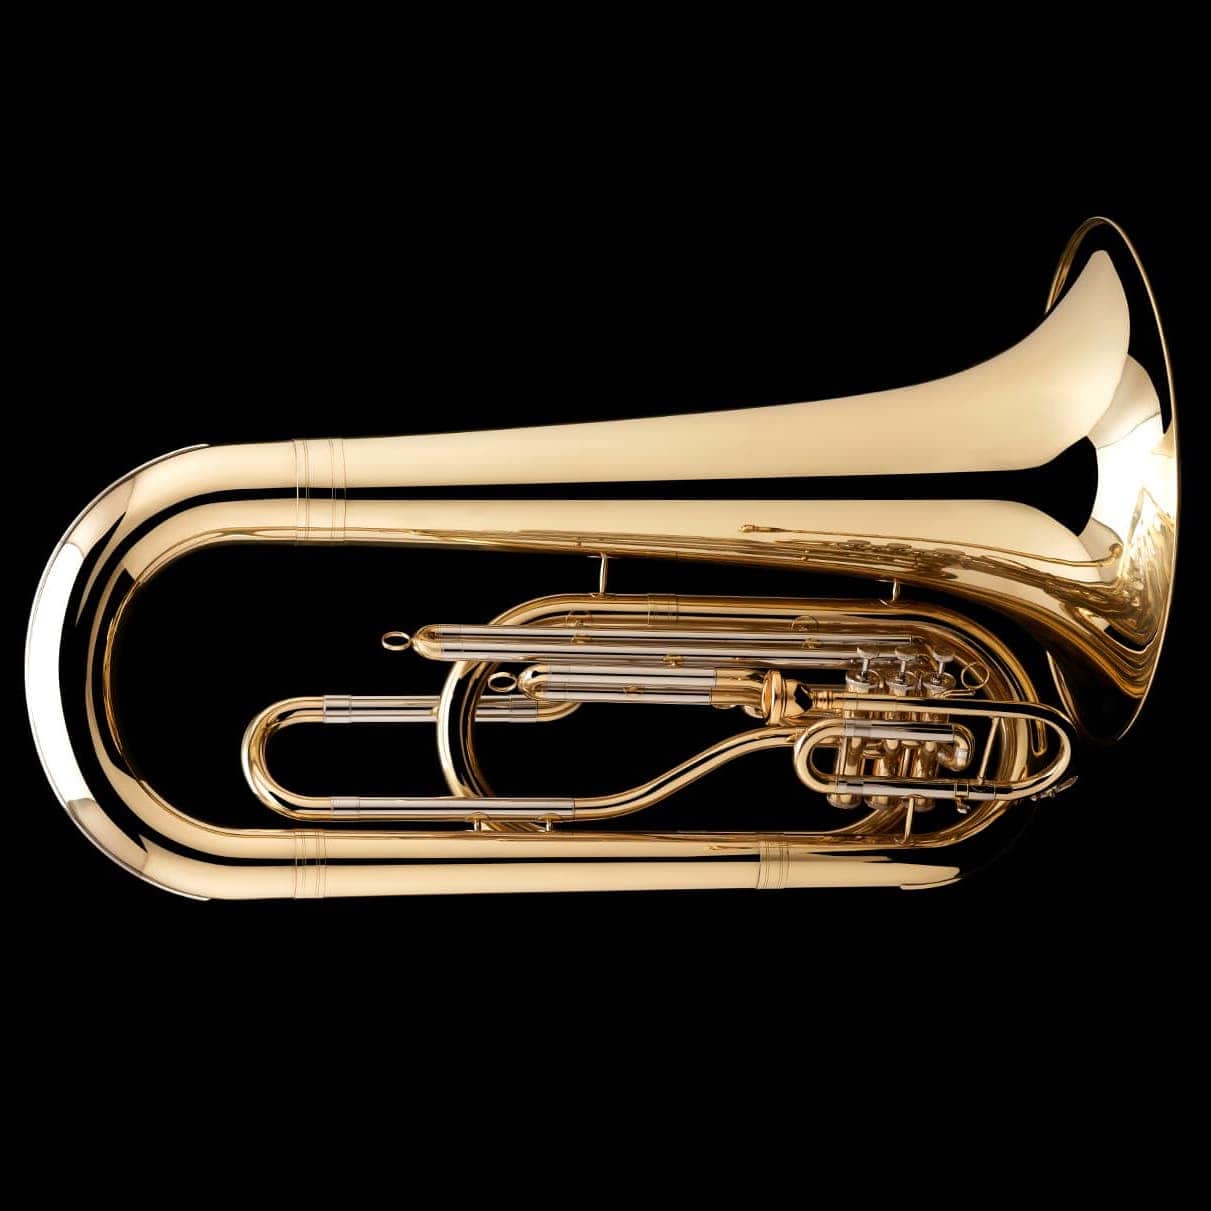 An image of a lacquered BBb 4/4 Marching Contra (tuba) from Wessex Tubas, facing right